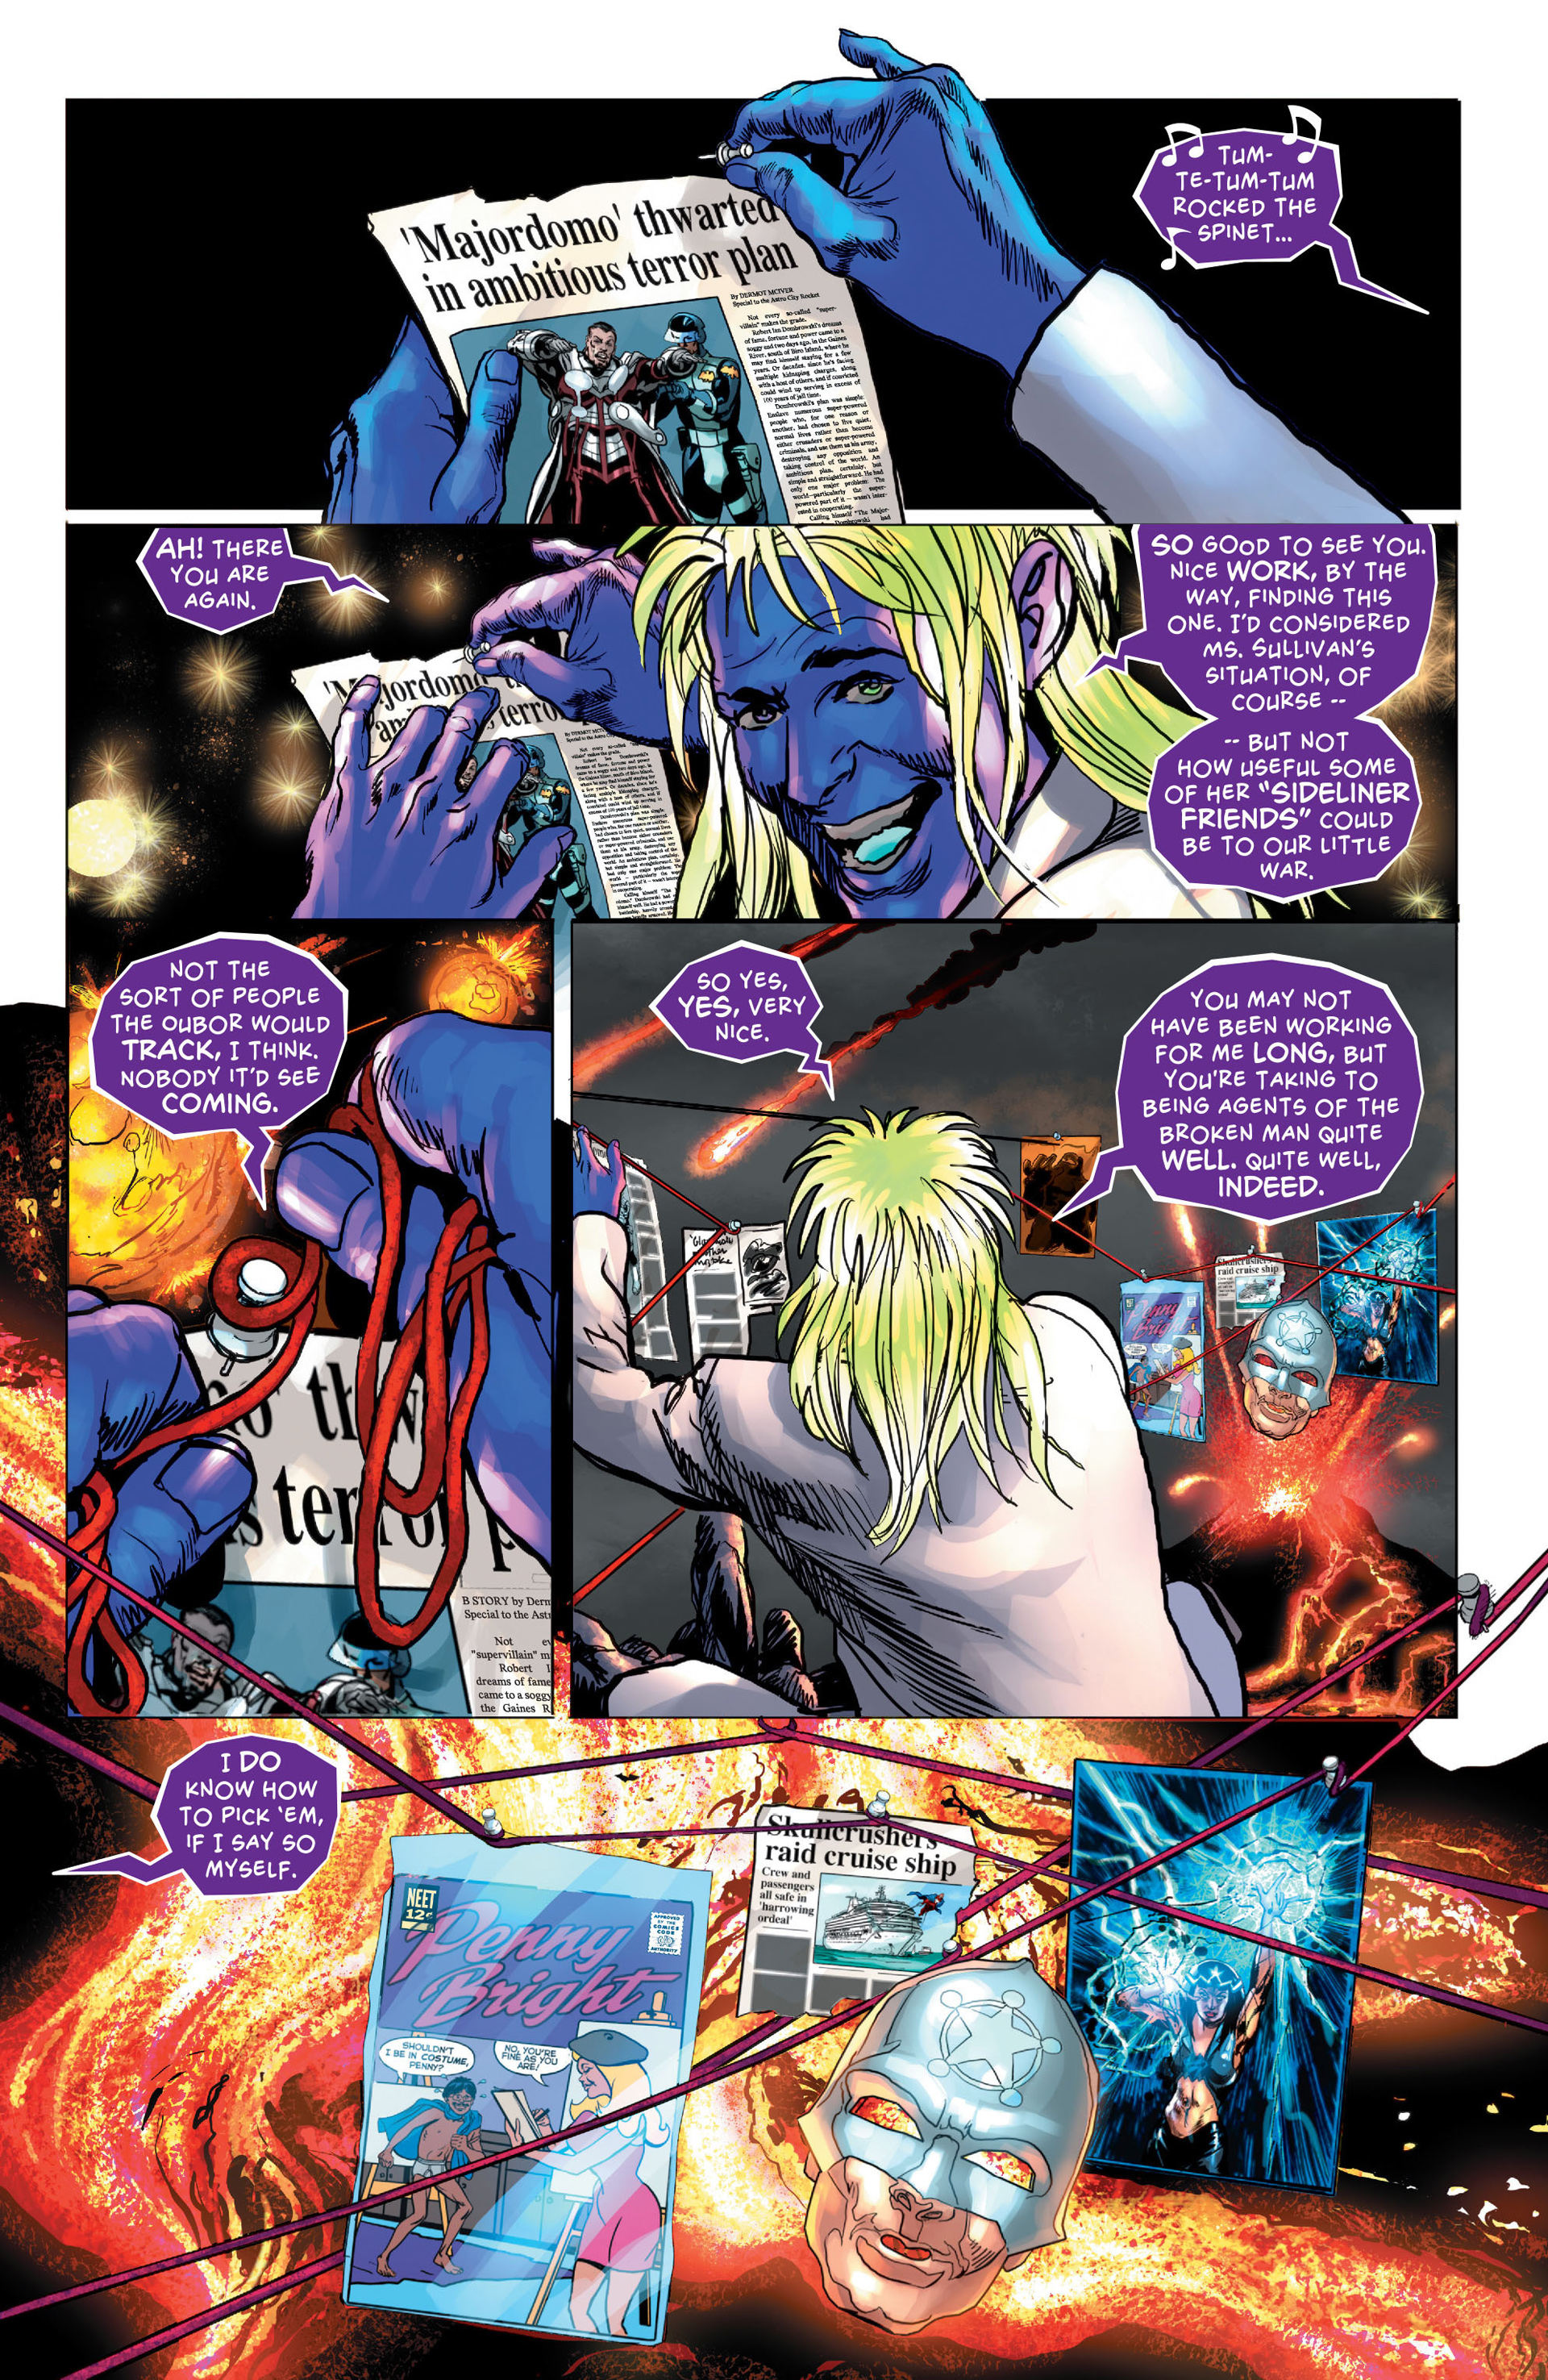 Astro City (2013-): Chapter 5 - Page 2